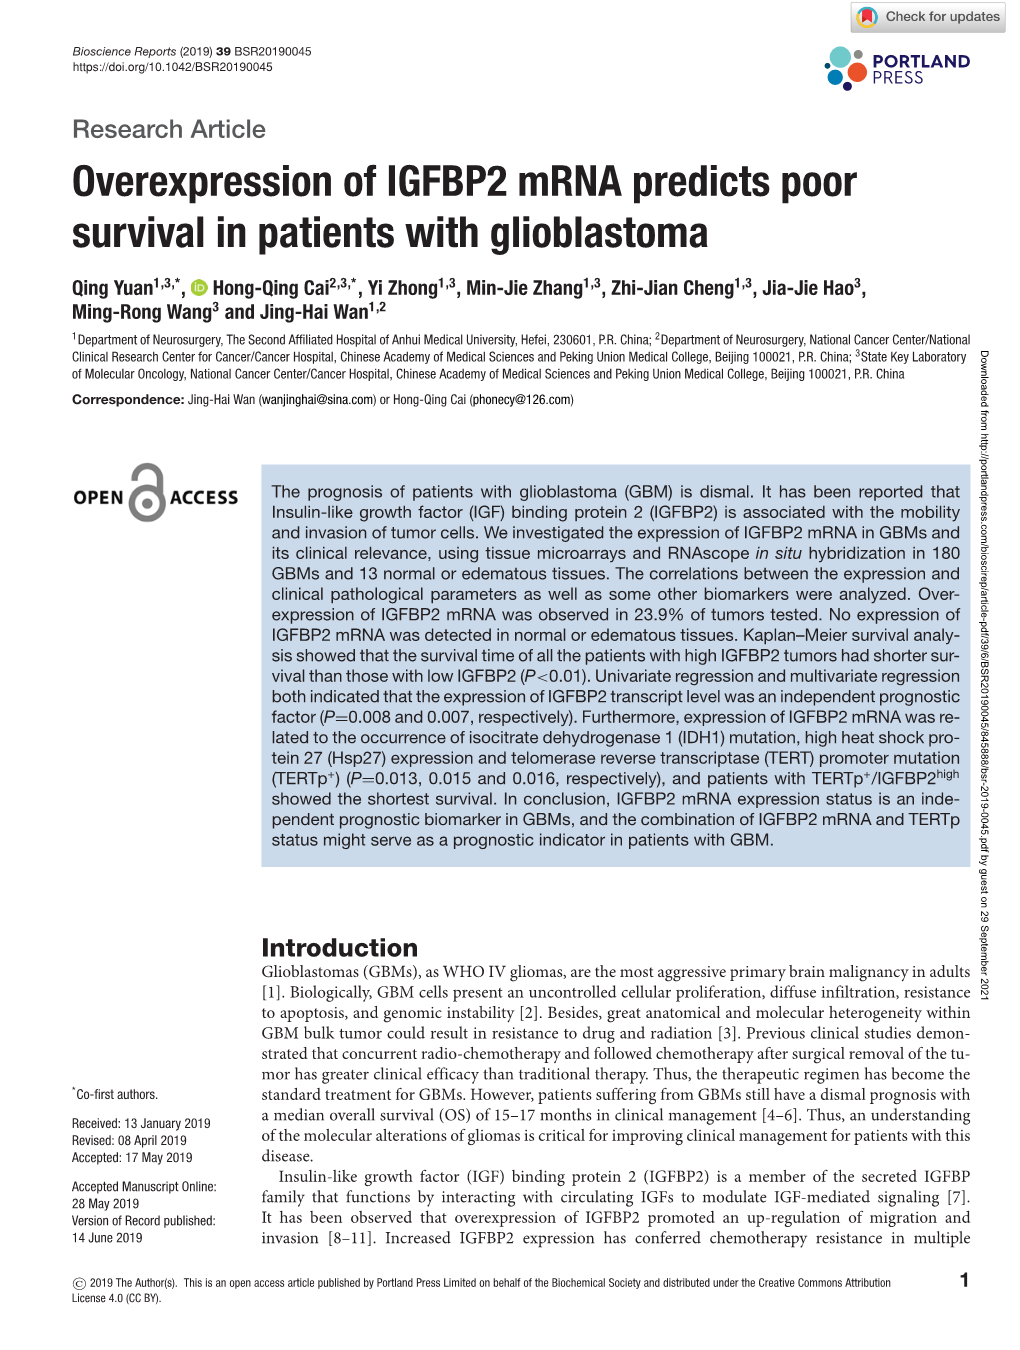 Overexpression of IGFBP2 Mrna Predicts Poor Survival in Patients with Glioblastoma